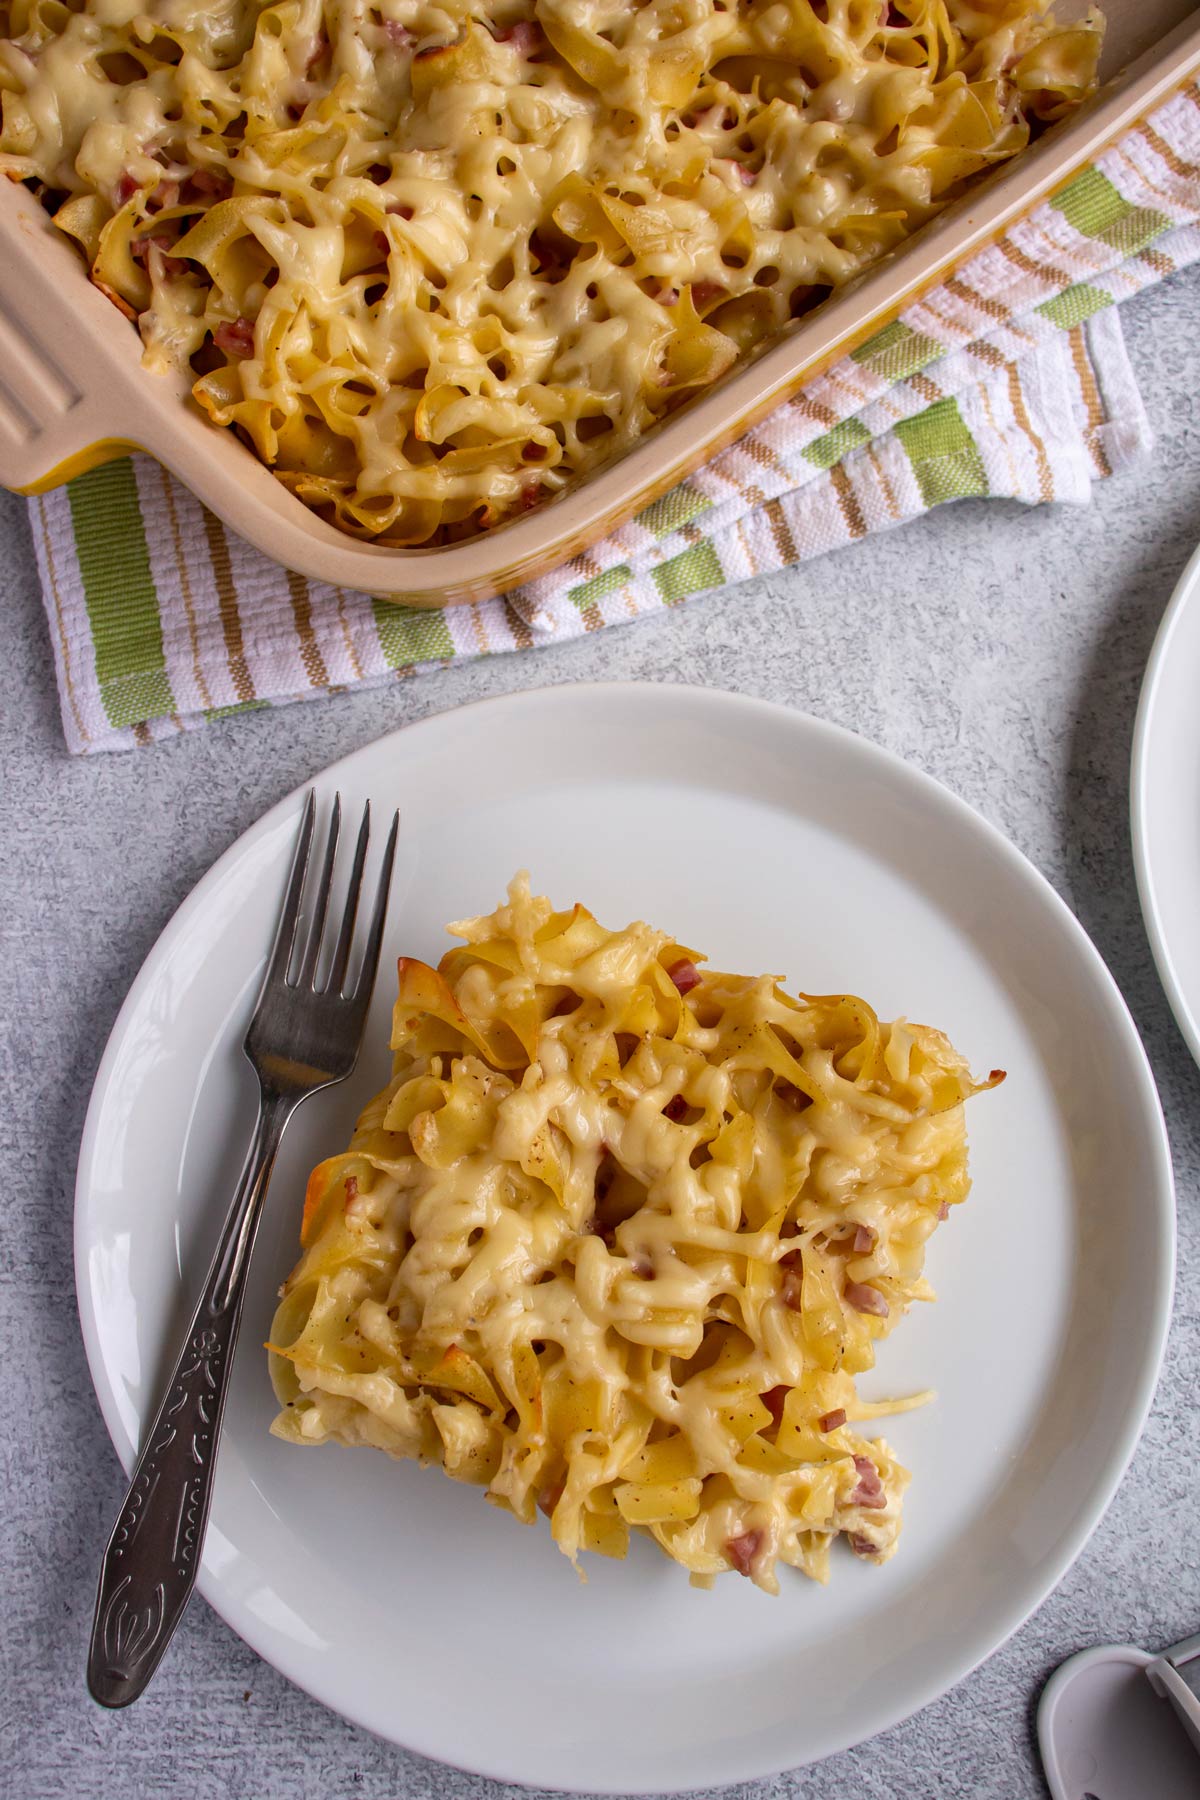 A piece of noodle casserole with a fork on a plate next to a casserole dish.